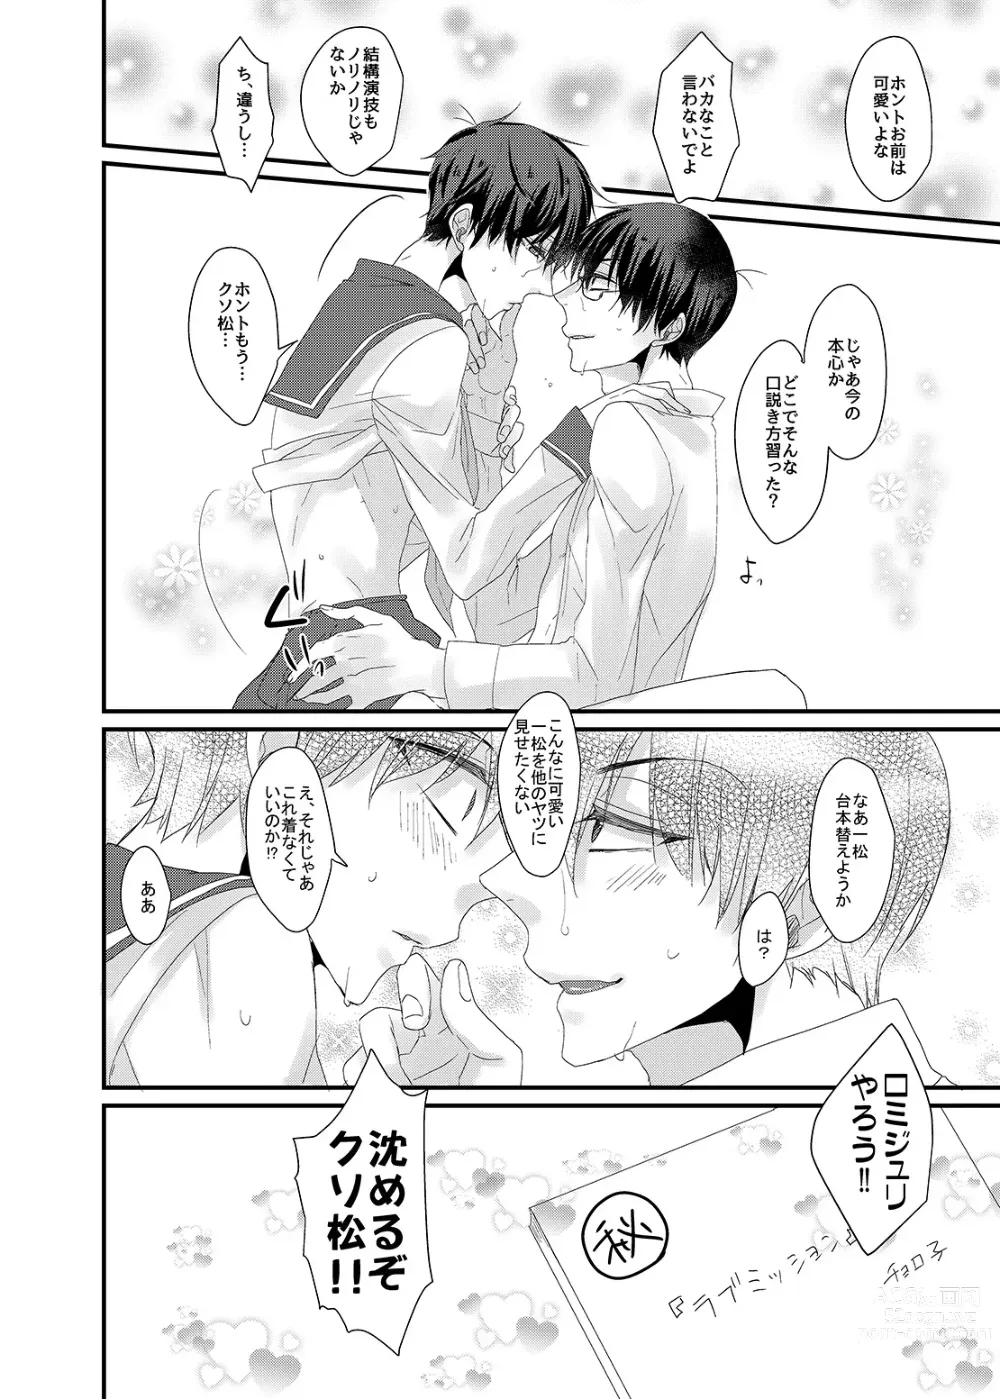 Page 24 of doujinshi 帰宅部一松、演劇部のノリについていけない!!